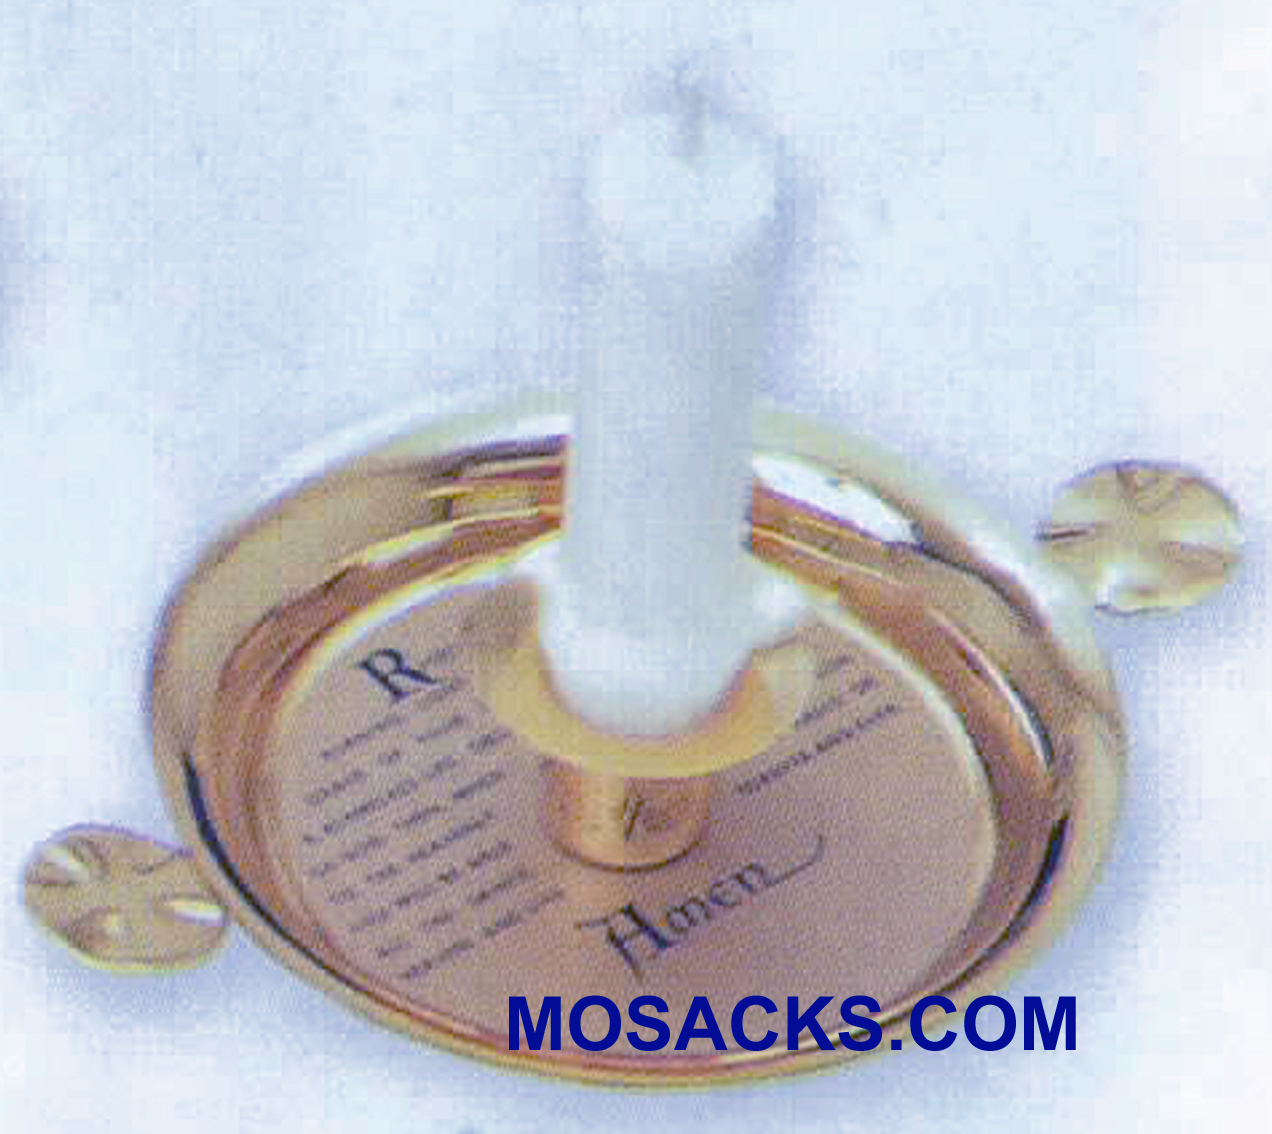 Baptismal Candlestick with Etched Prayer is Stainless Steel and Tray measures 4-3/4" Diameter K18S